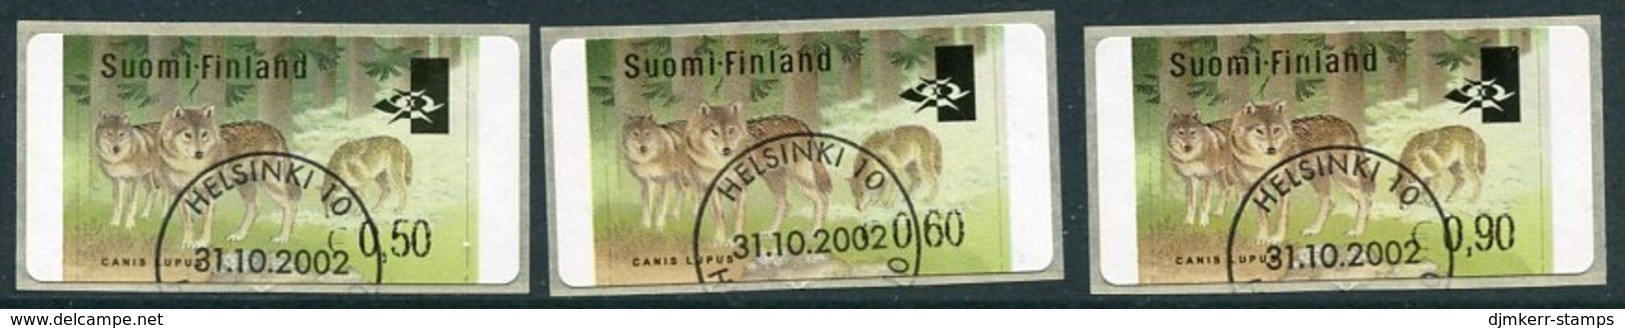 FINLAND 2002 Wolves ATM, Three Values Used.  Michel 38 - Machine Labels [ATM]